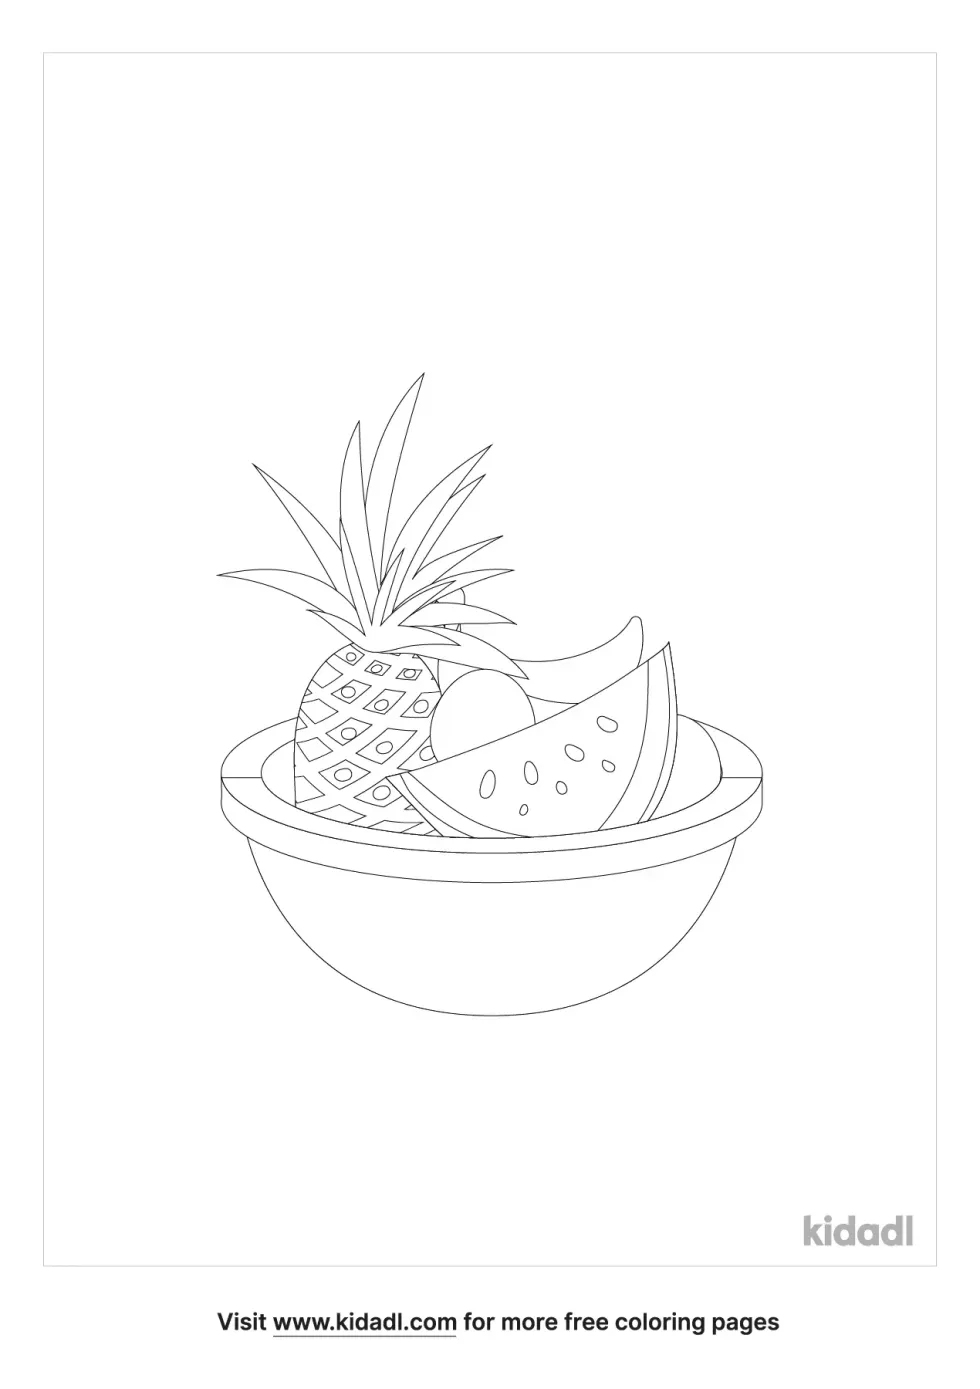 Cuban Food Coloring Page